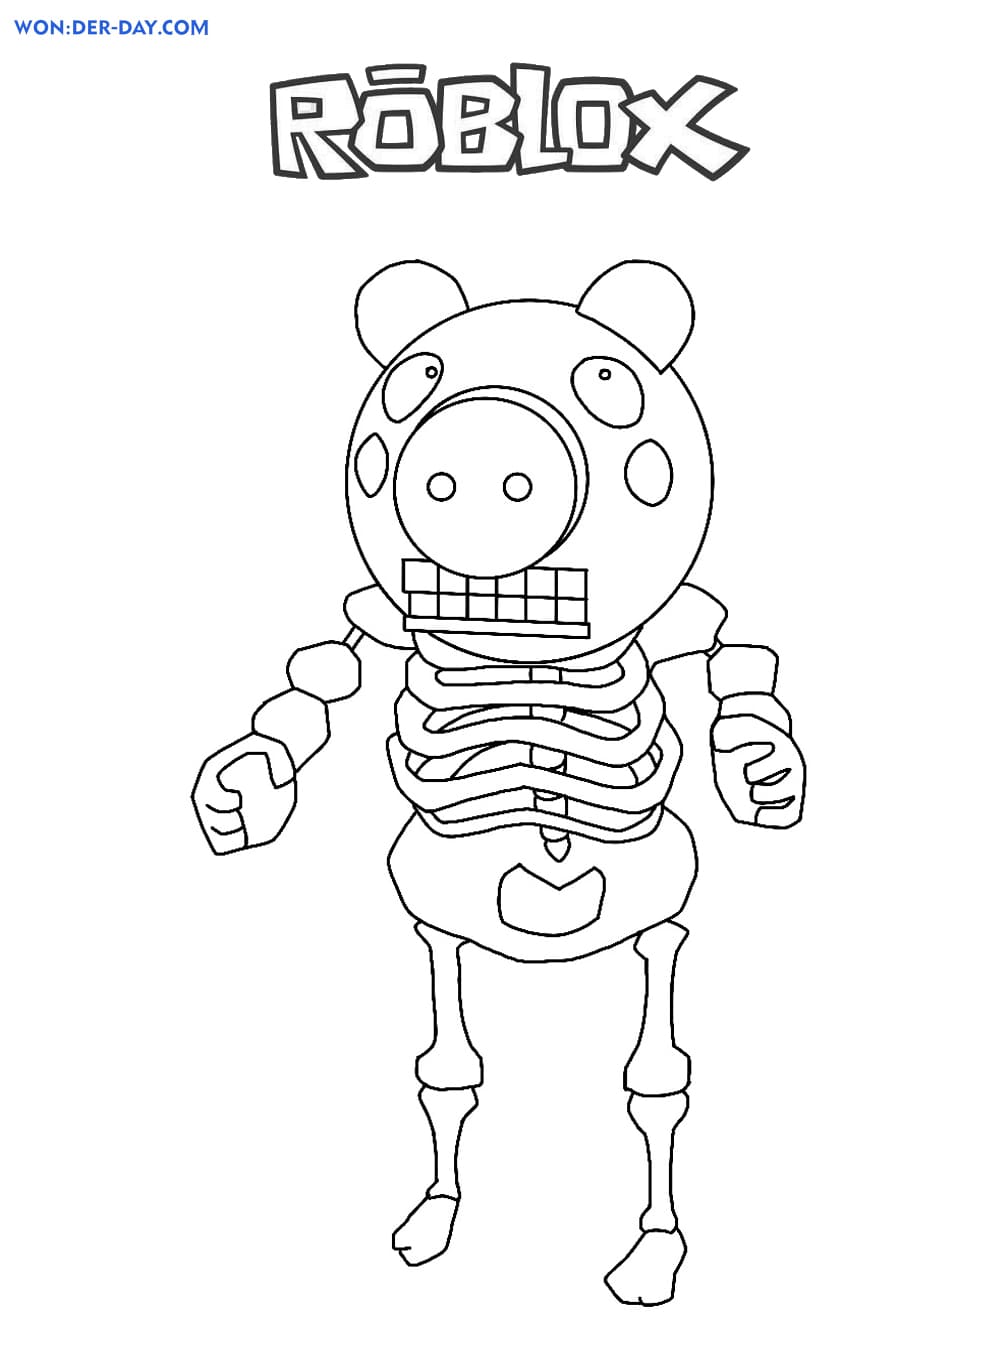 Piggy Roblox Coloring Pages Wonder Day Coloring Pages For Children And Adults - black and white gaming roblox pages